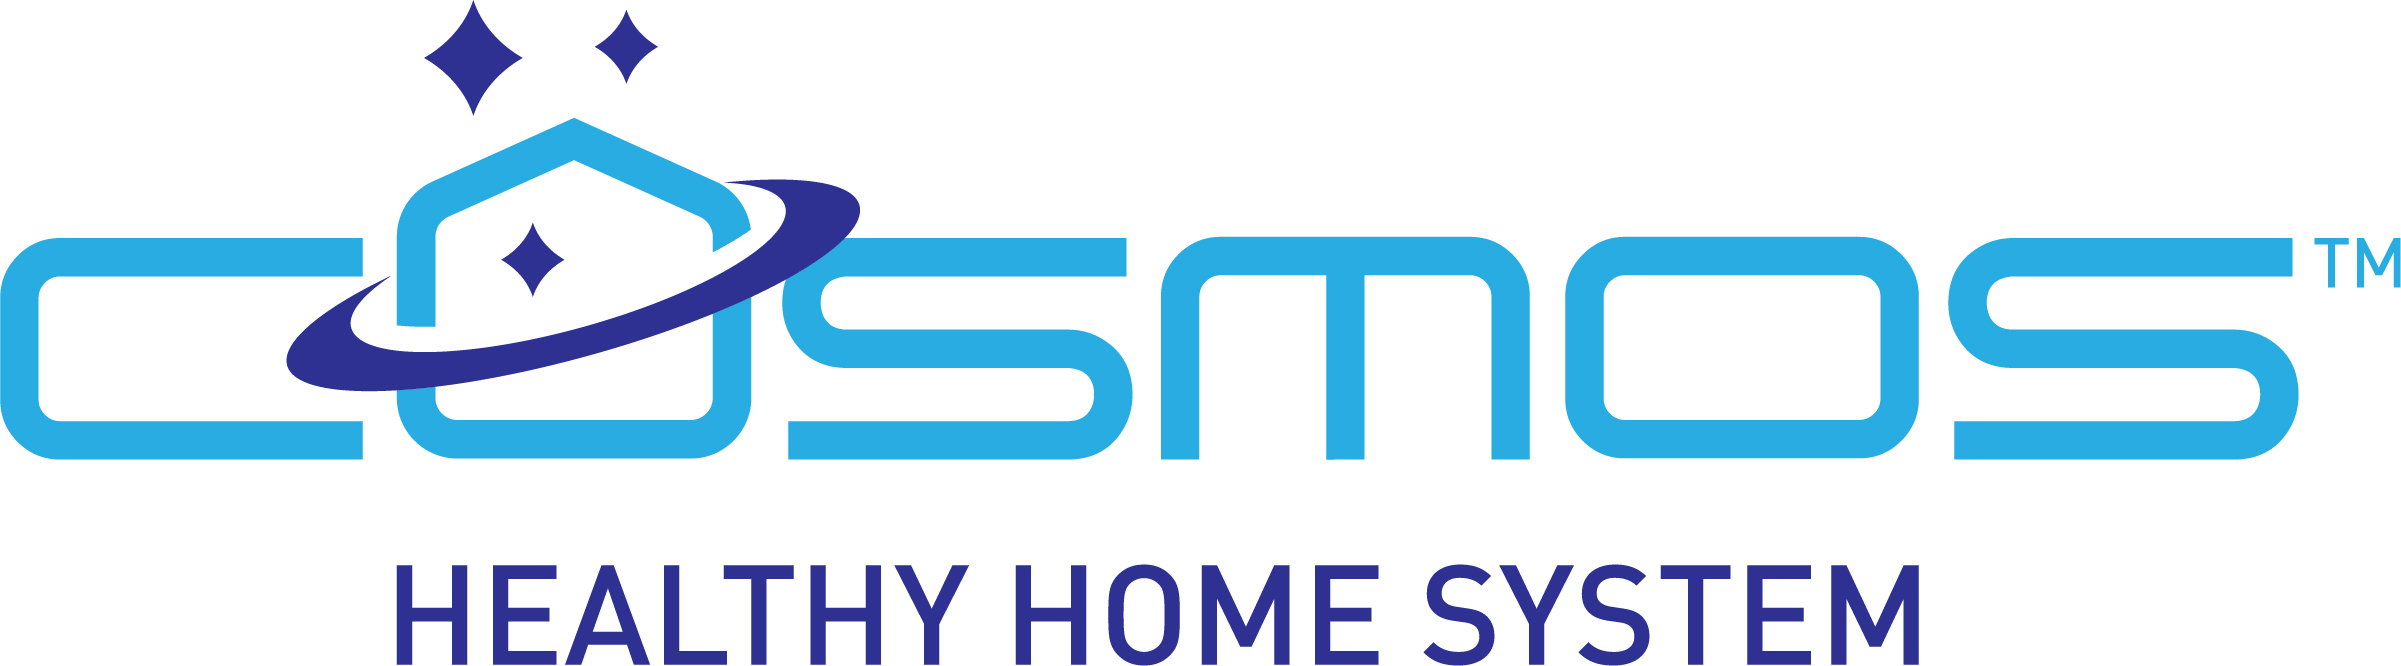 Cosmos Healthy Home System by Panasonic